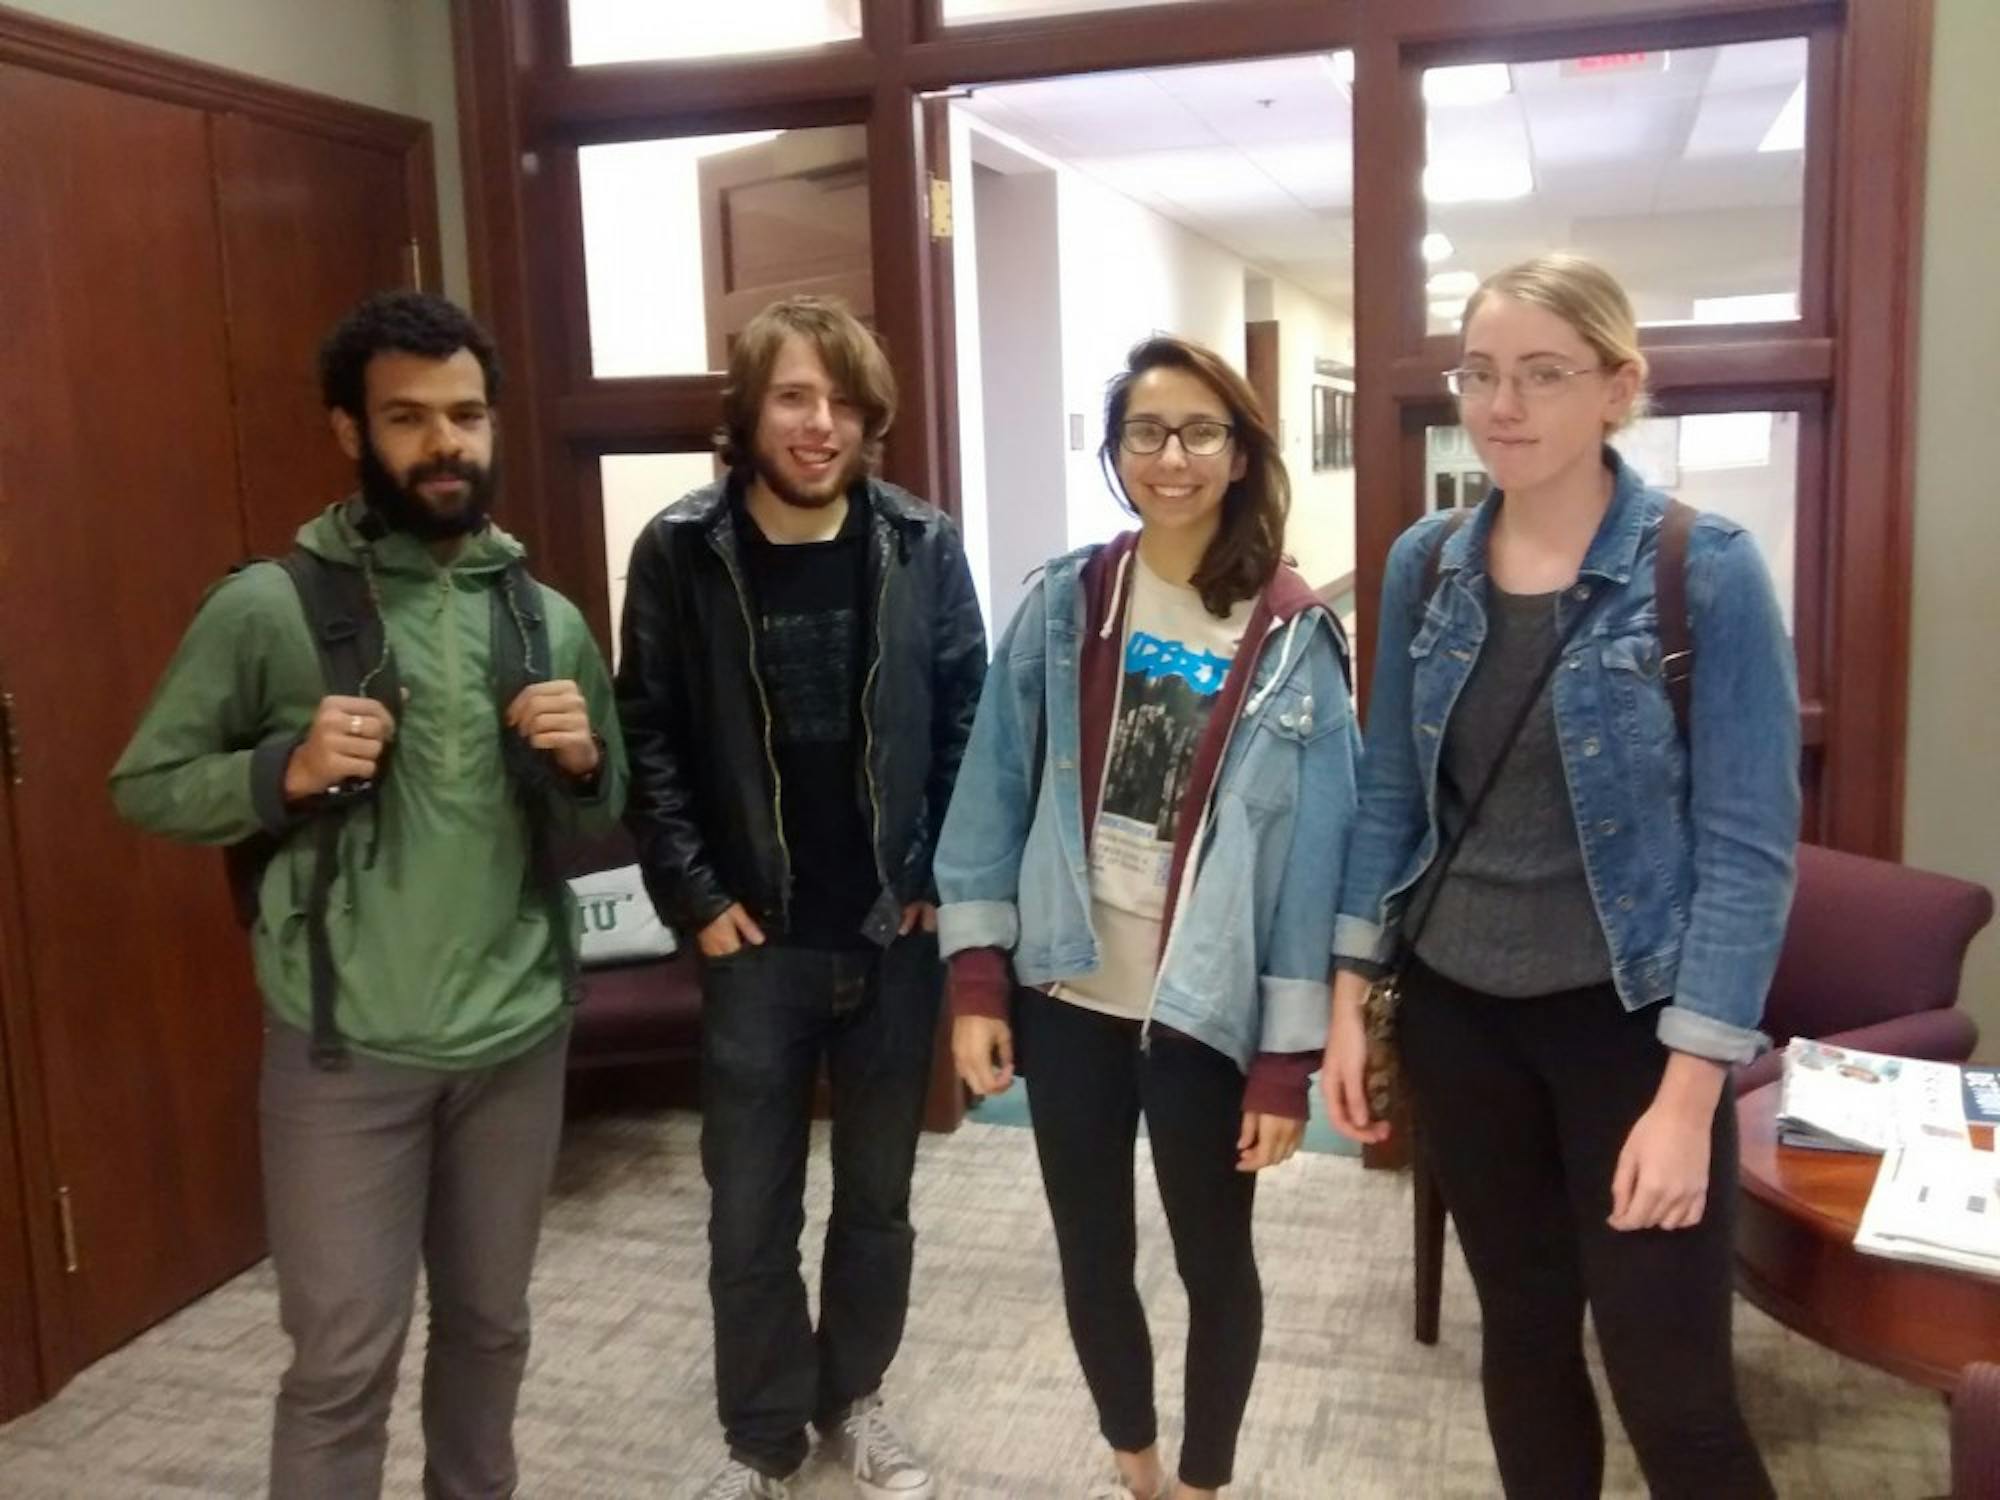 From left to right, Samir Webster, Jake Maynard, Gabriella Arkelian and Emily Hoepner, from Students for an Ethical and Participatory Education,&nbsp;delivered their letter to interim president, provost and executive vice president&nbsp;Kim Schatzel.